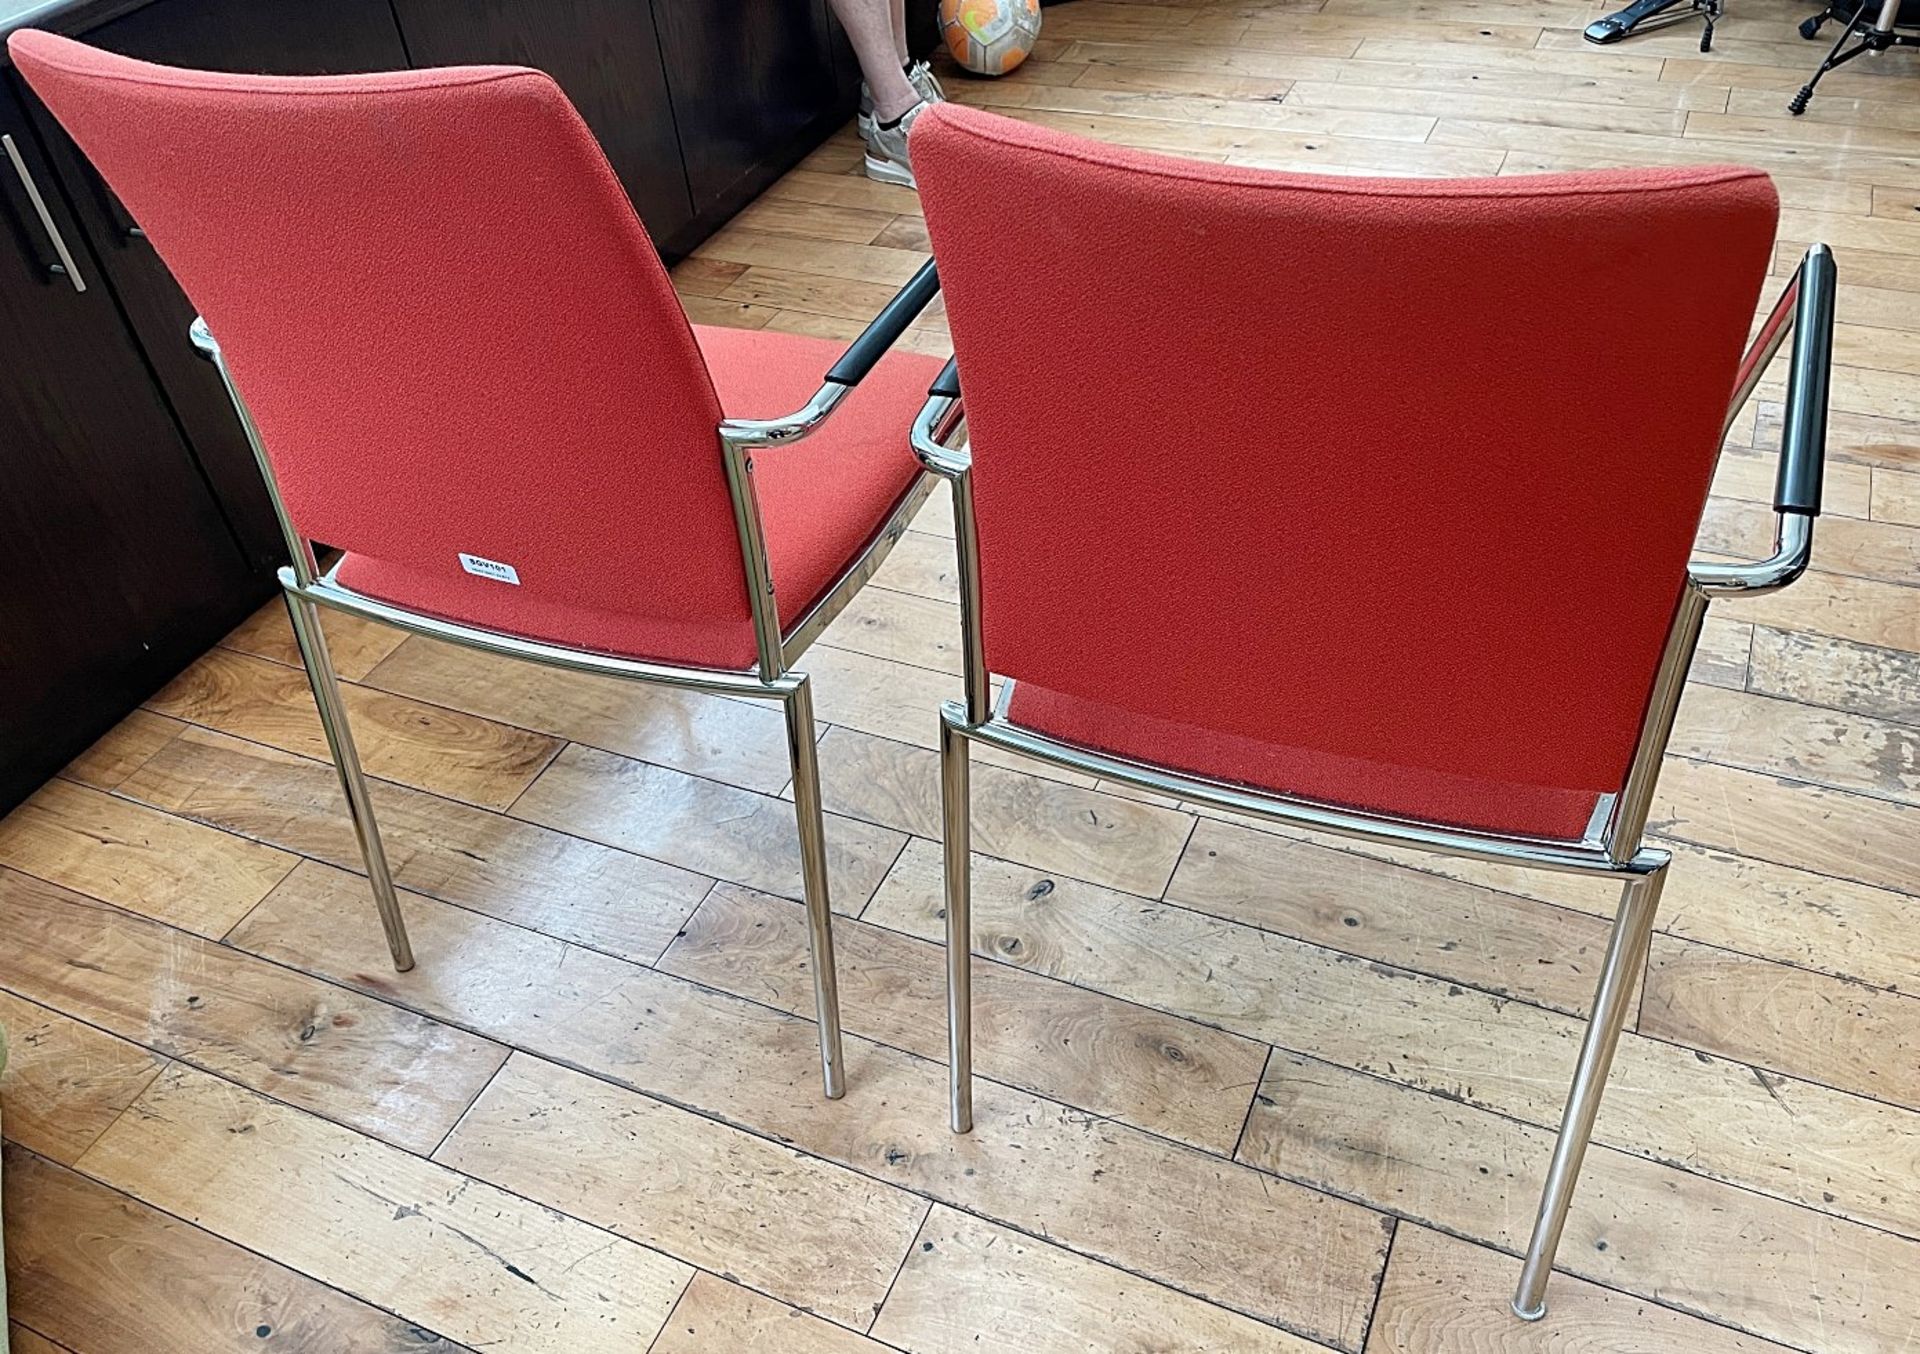 A Pair Of CARLO Stacking Chairs With Arms In Chromed Steel - NO VAT ON THE HAMMER - Image 5 of 8